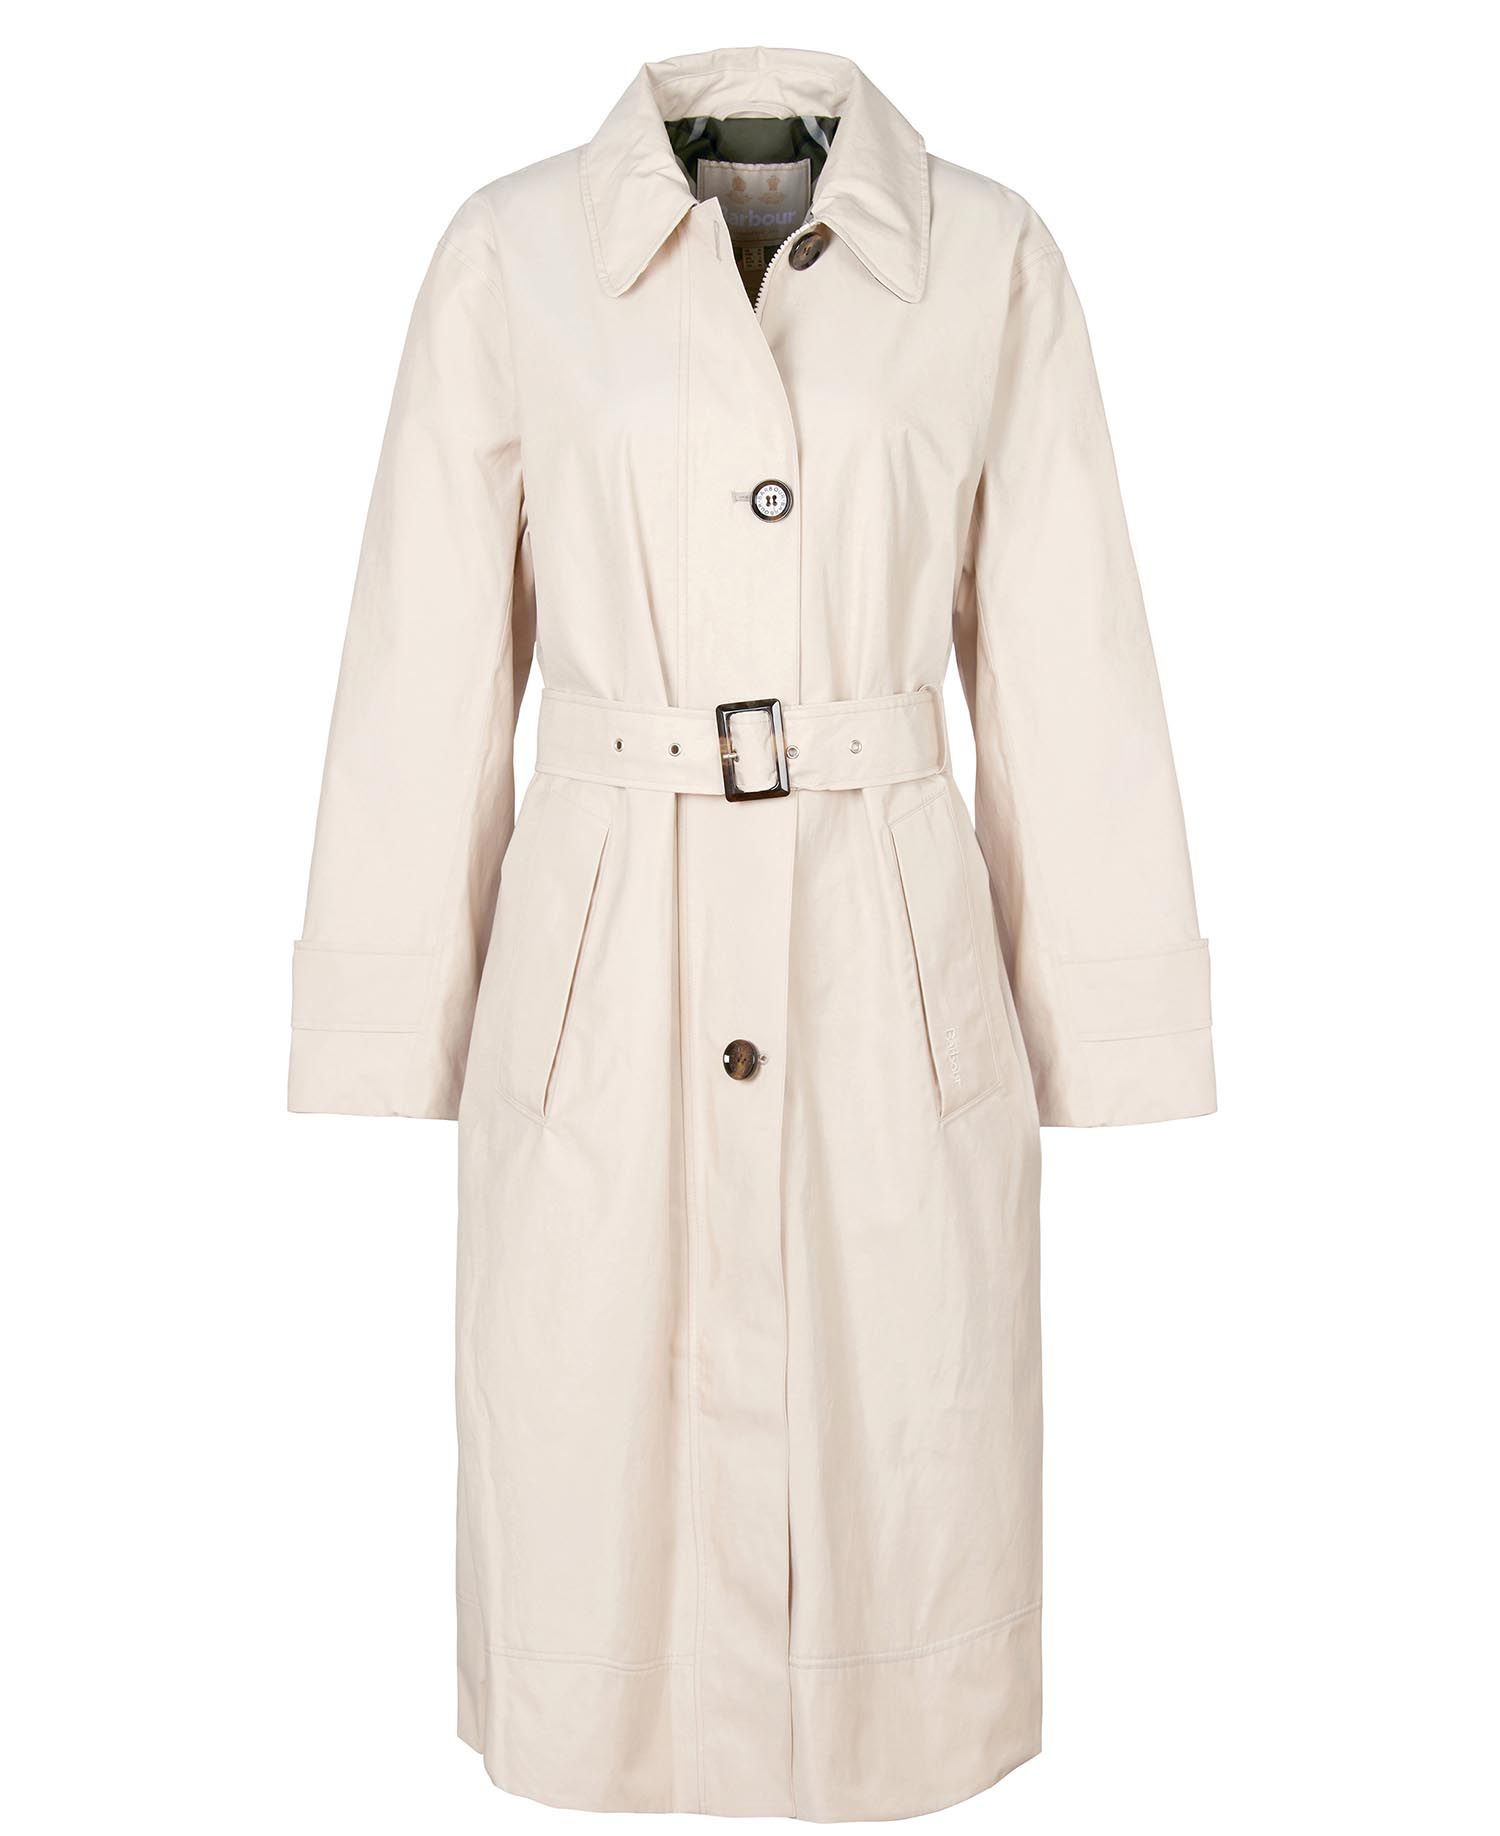 Barbour Somerland Trench Coat